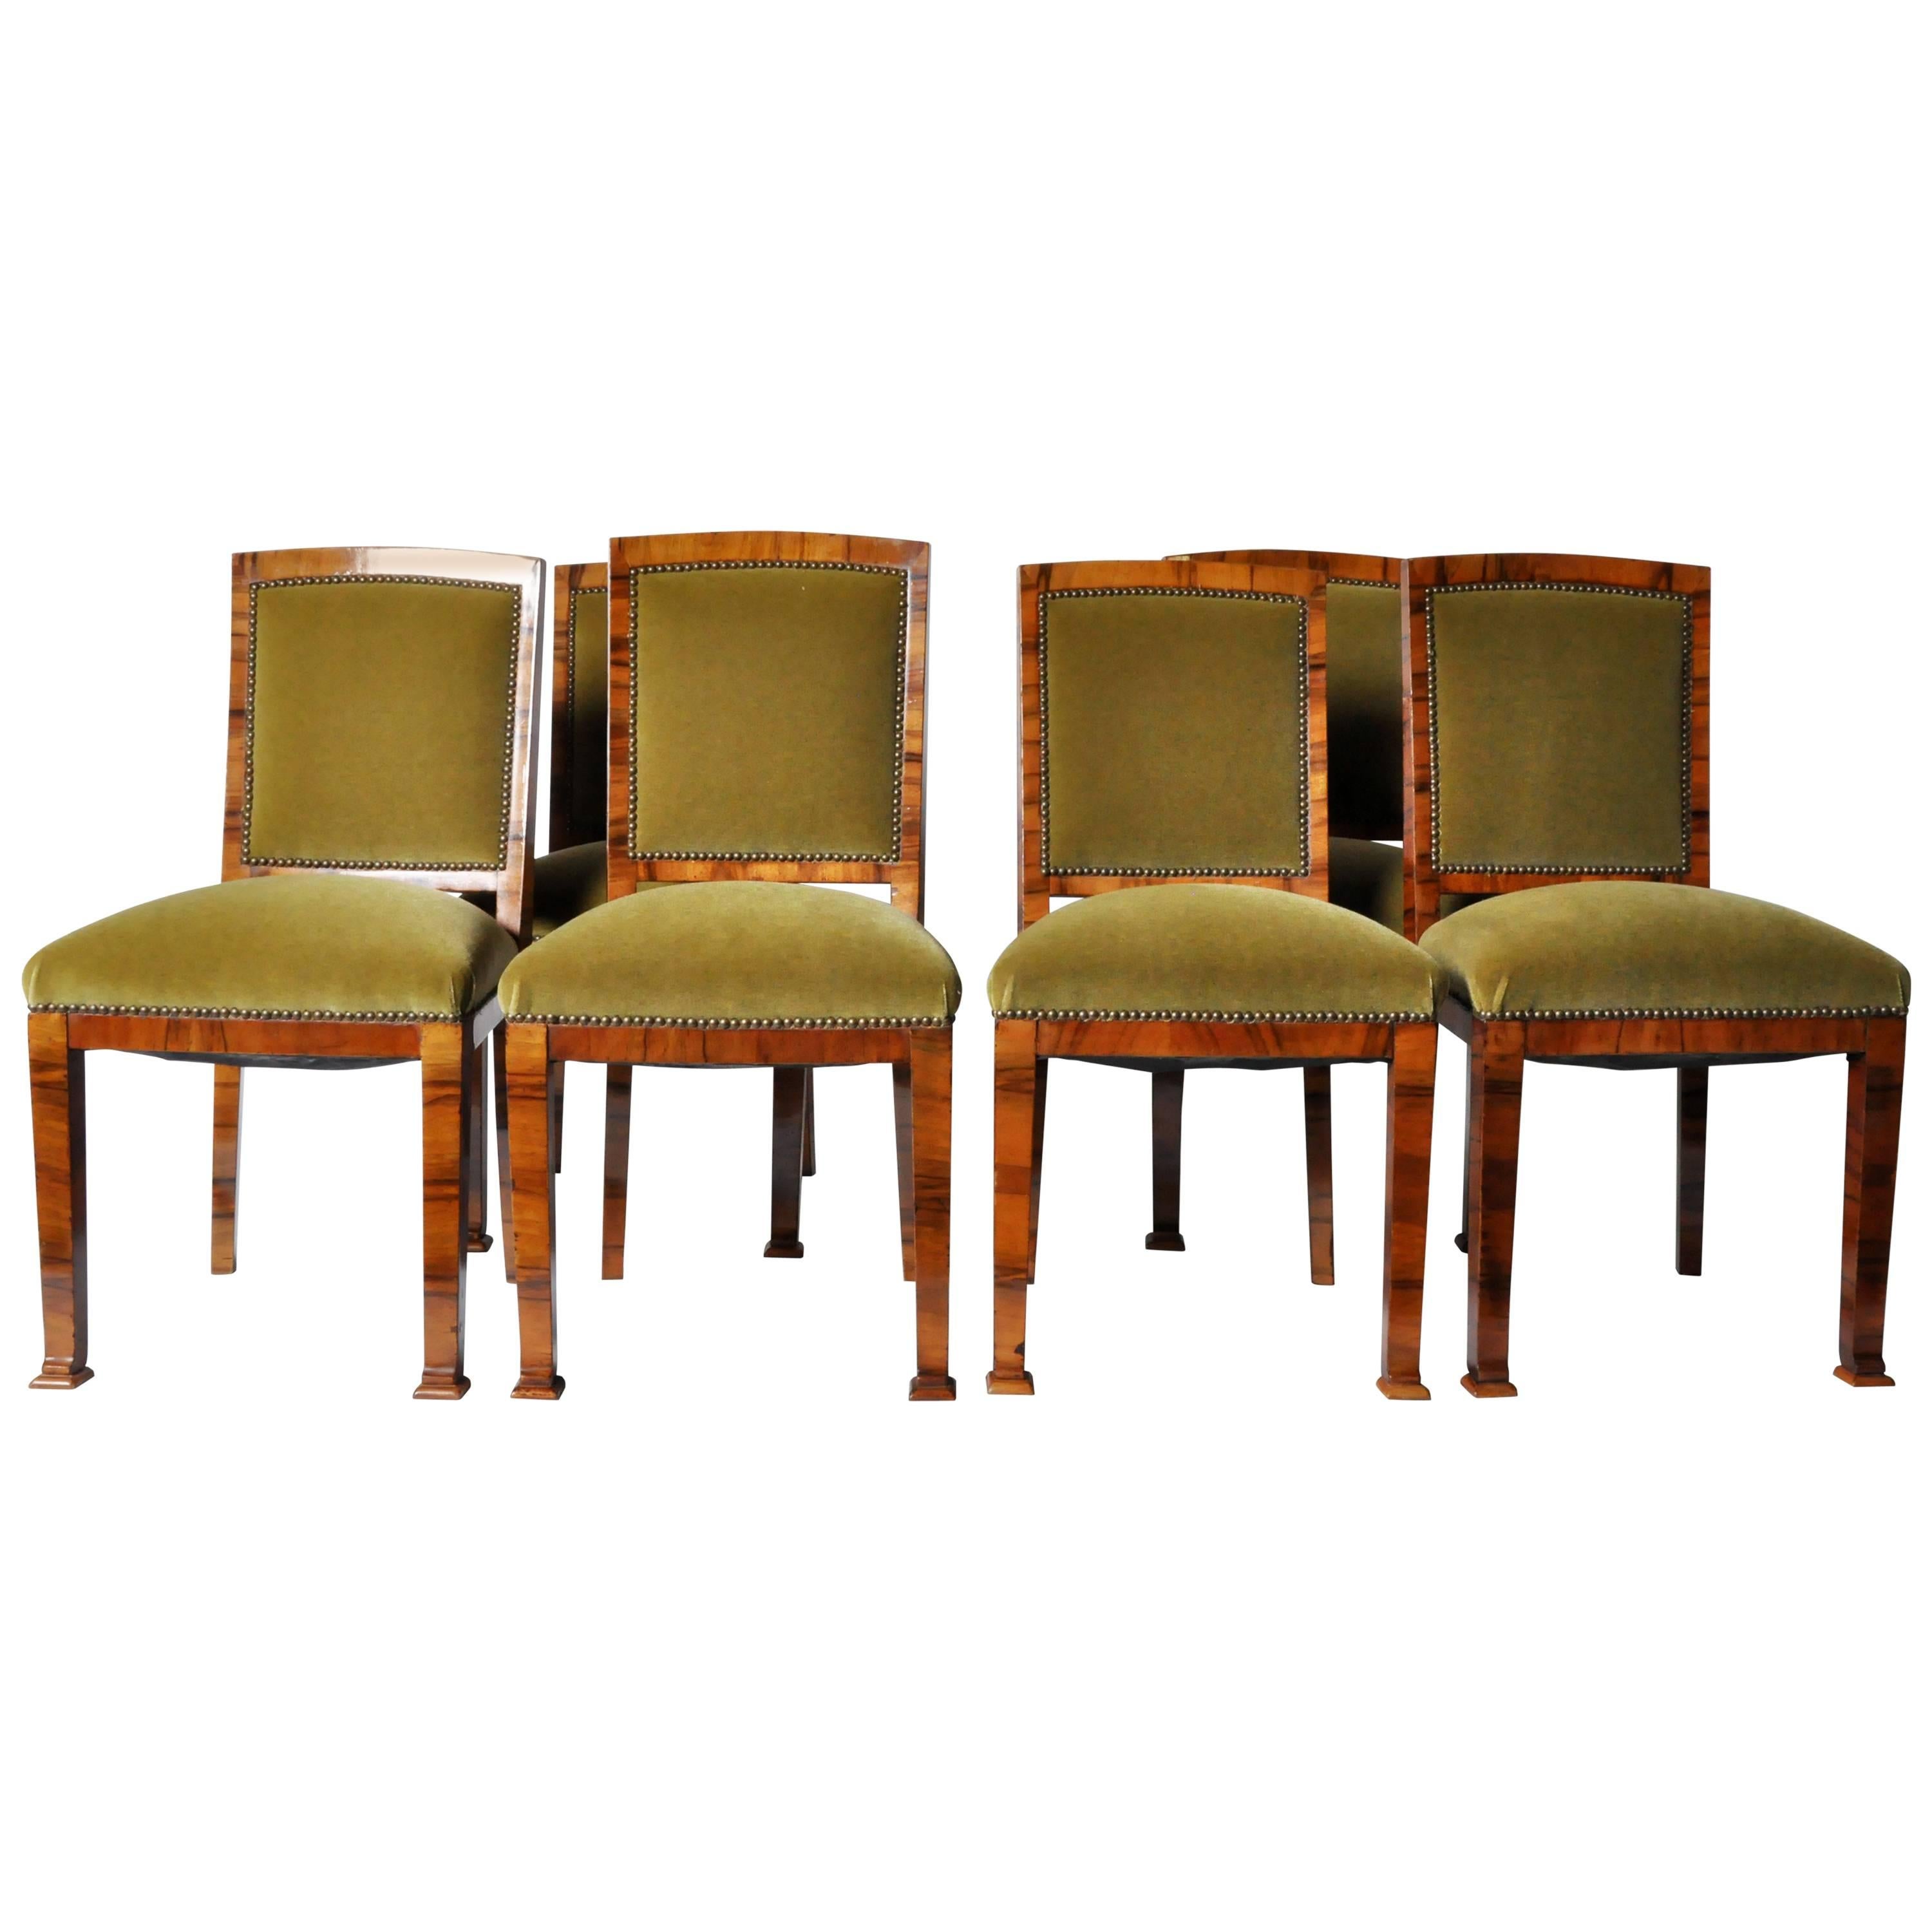 Set of Six Hungarian Dining Chairs